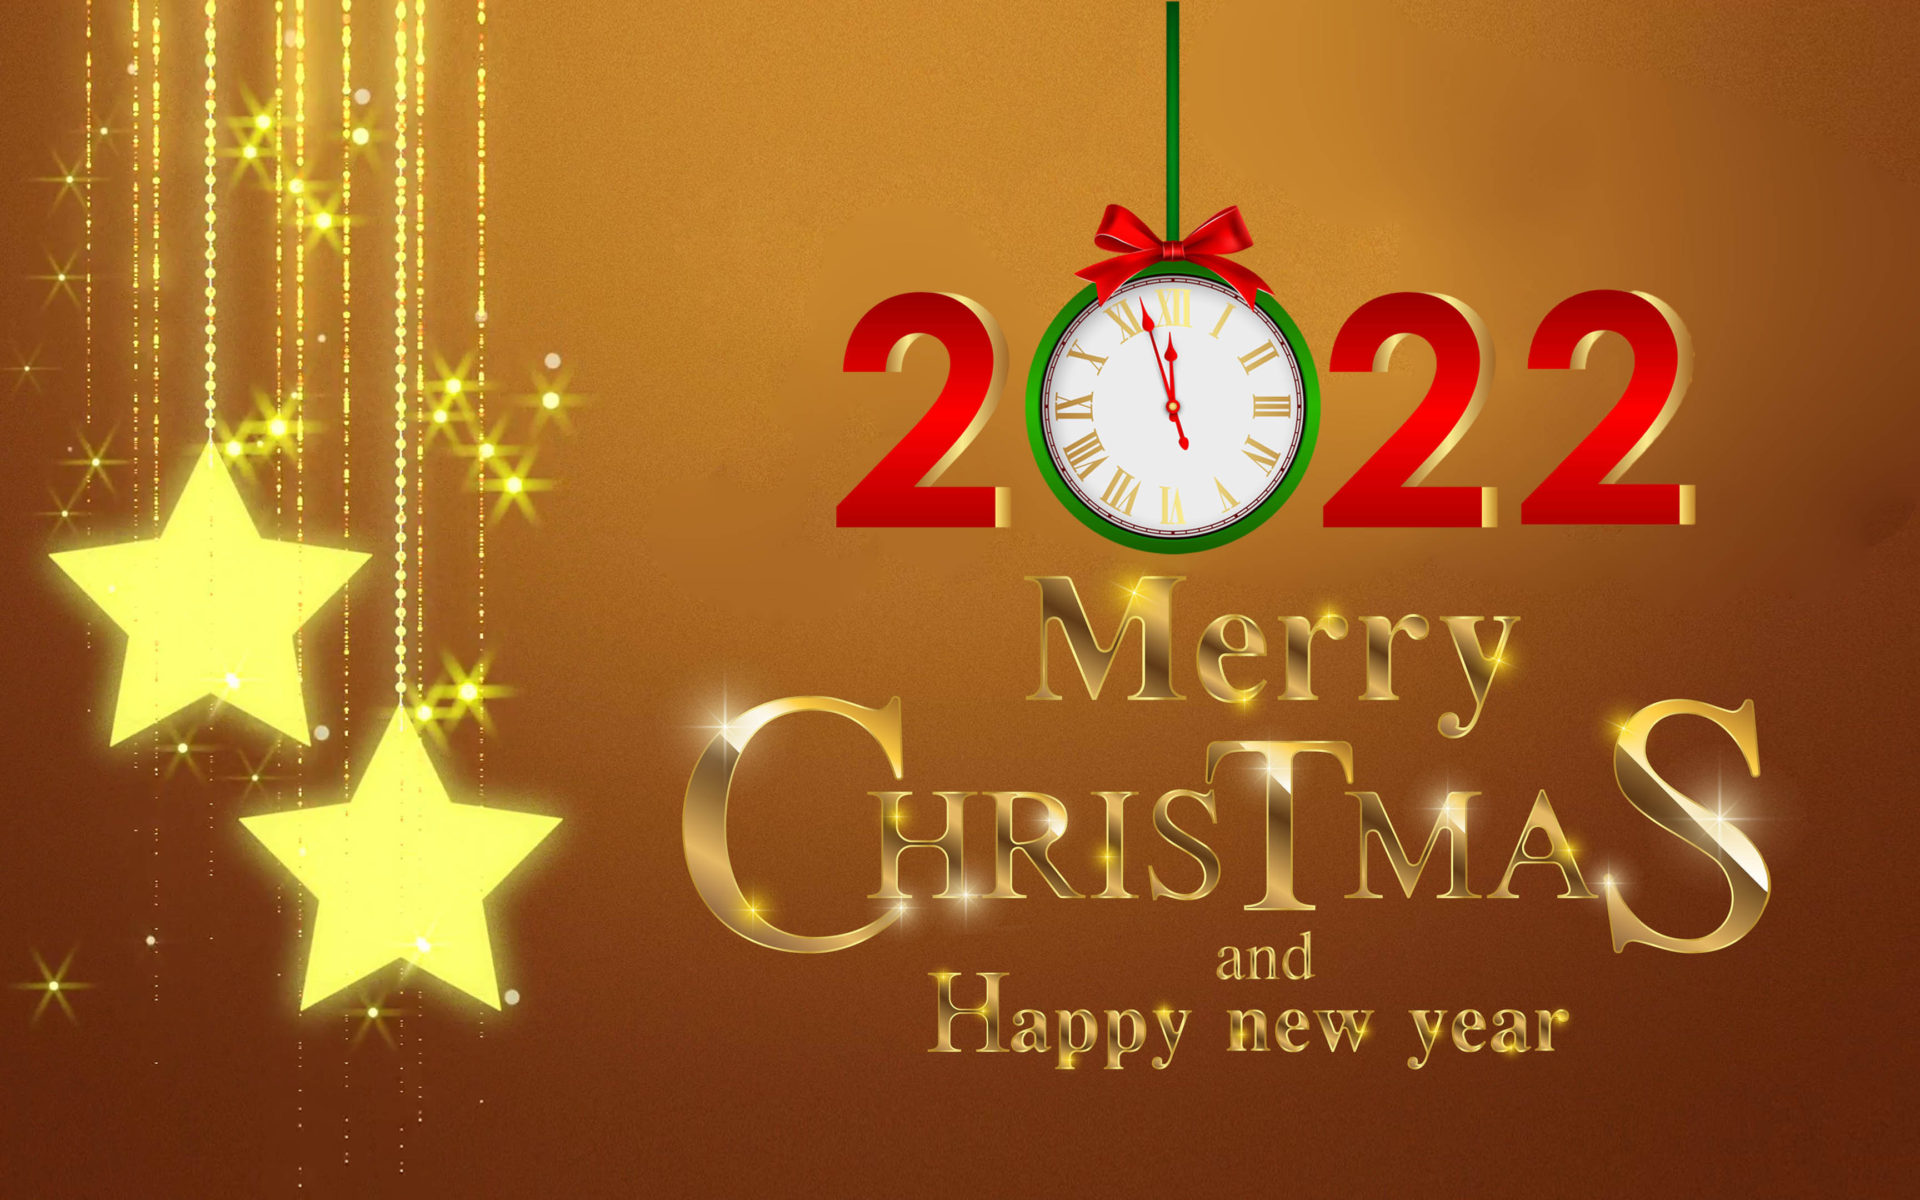 Merry Christmas And Happy New Year 2022 Gold 4k Ultra Hd Desktop 1920x1200